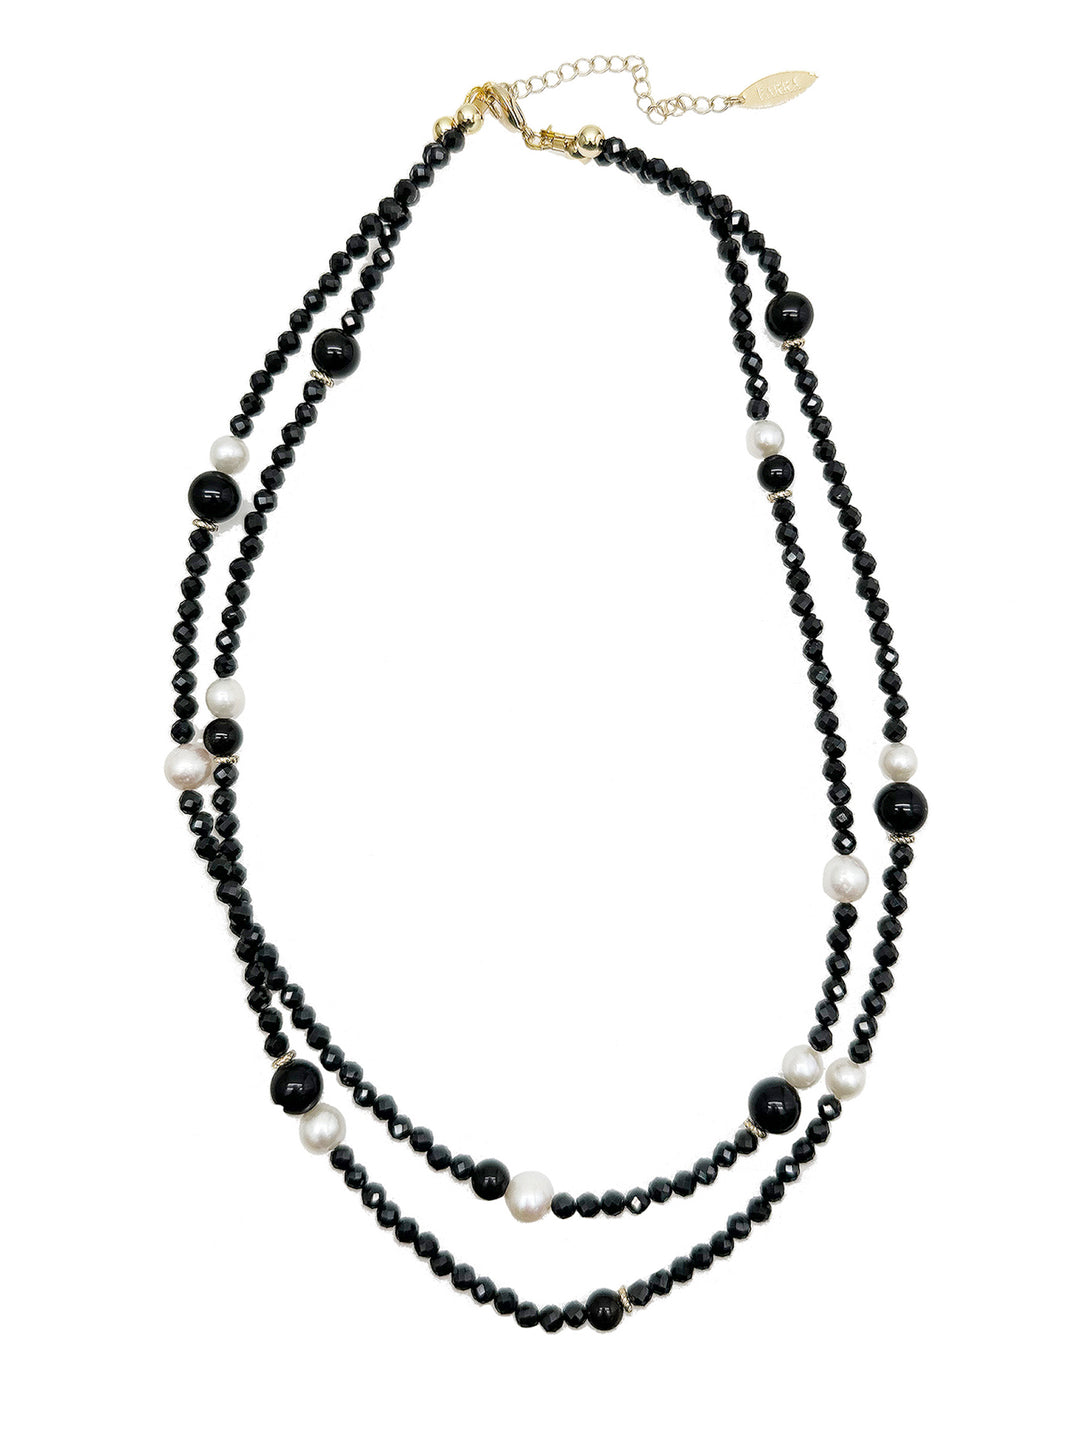 Black Obsidian And Freshwater Pearl Double Strands  Necklace KN056 - FARRA